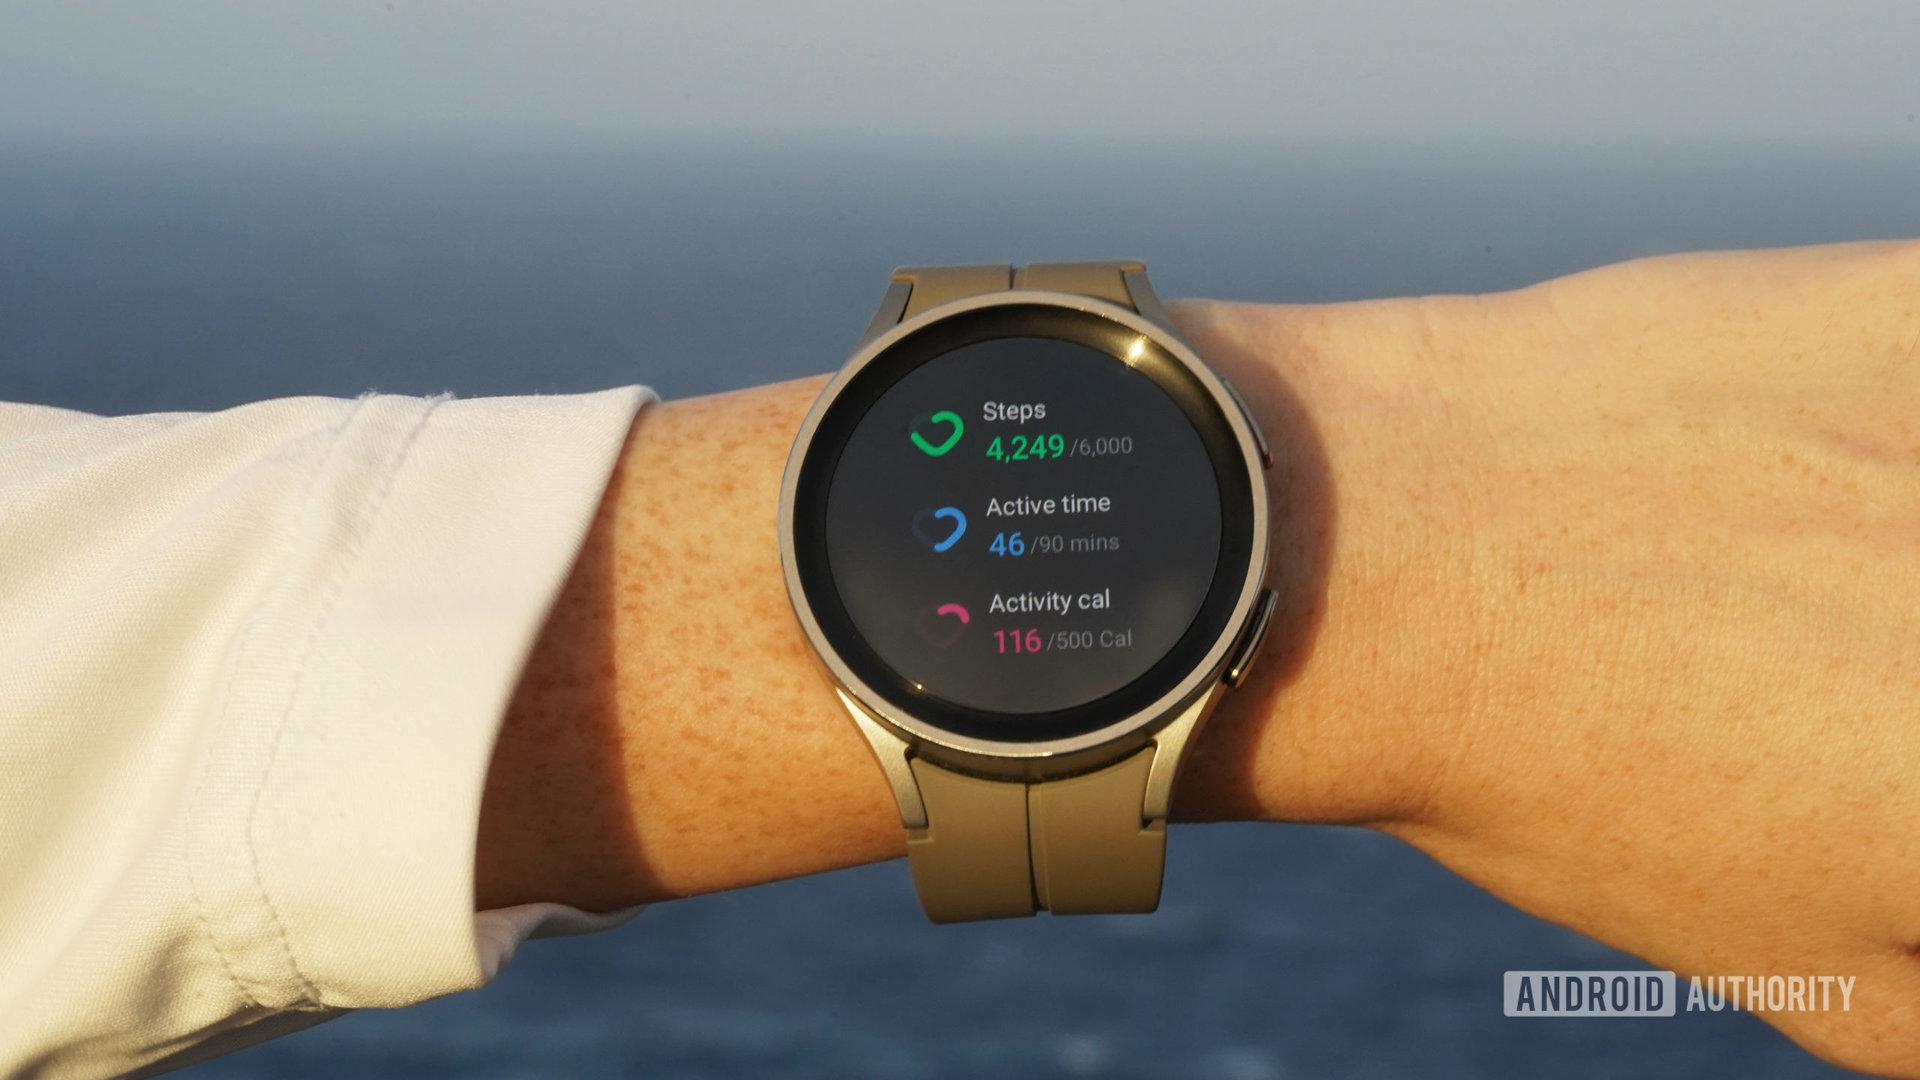 A Samsung Galaxy Watch 5 Pro displays a users activity stats.